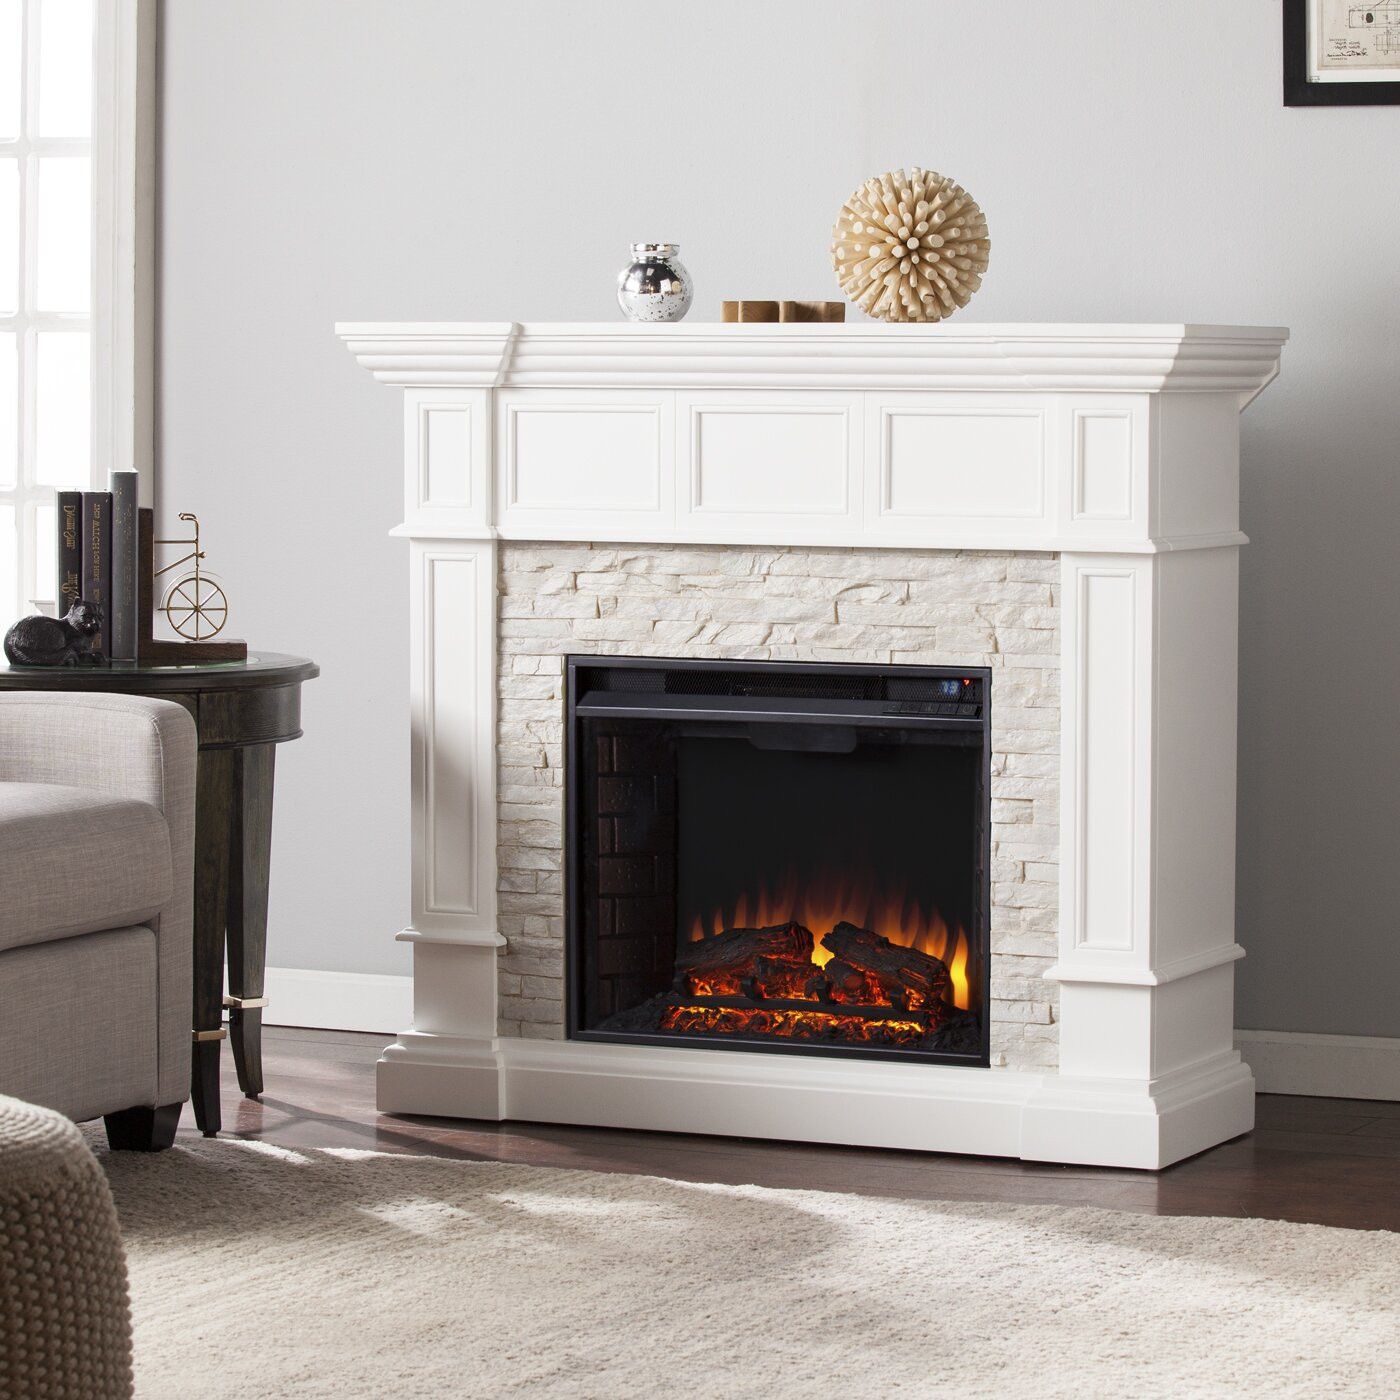 Home Electric Fireplace
 Darby Home Co Prussia Corner Convertible Electric